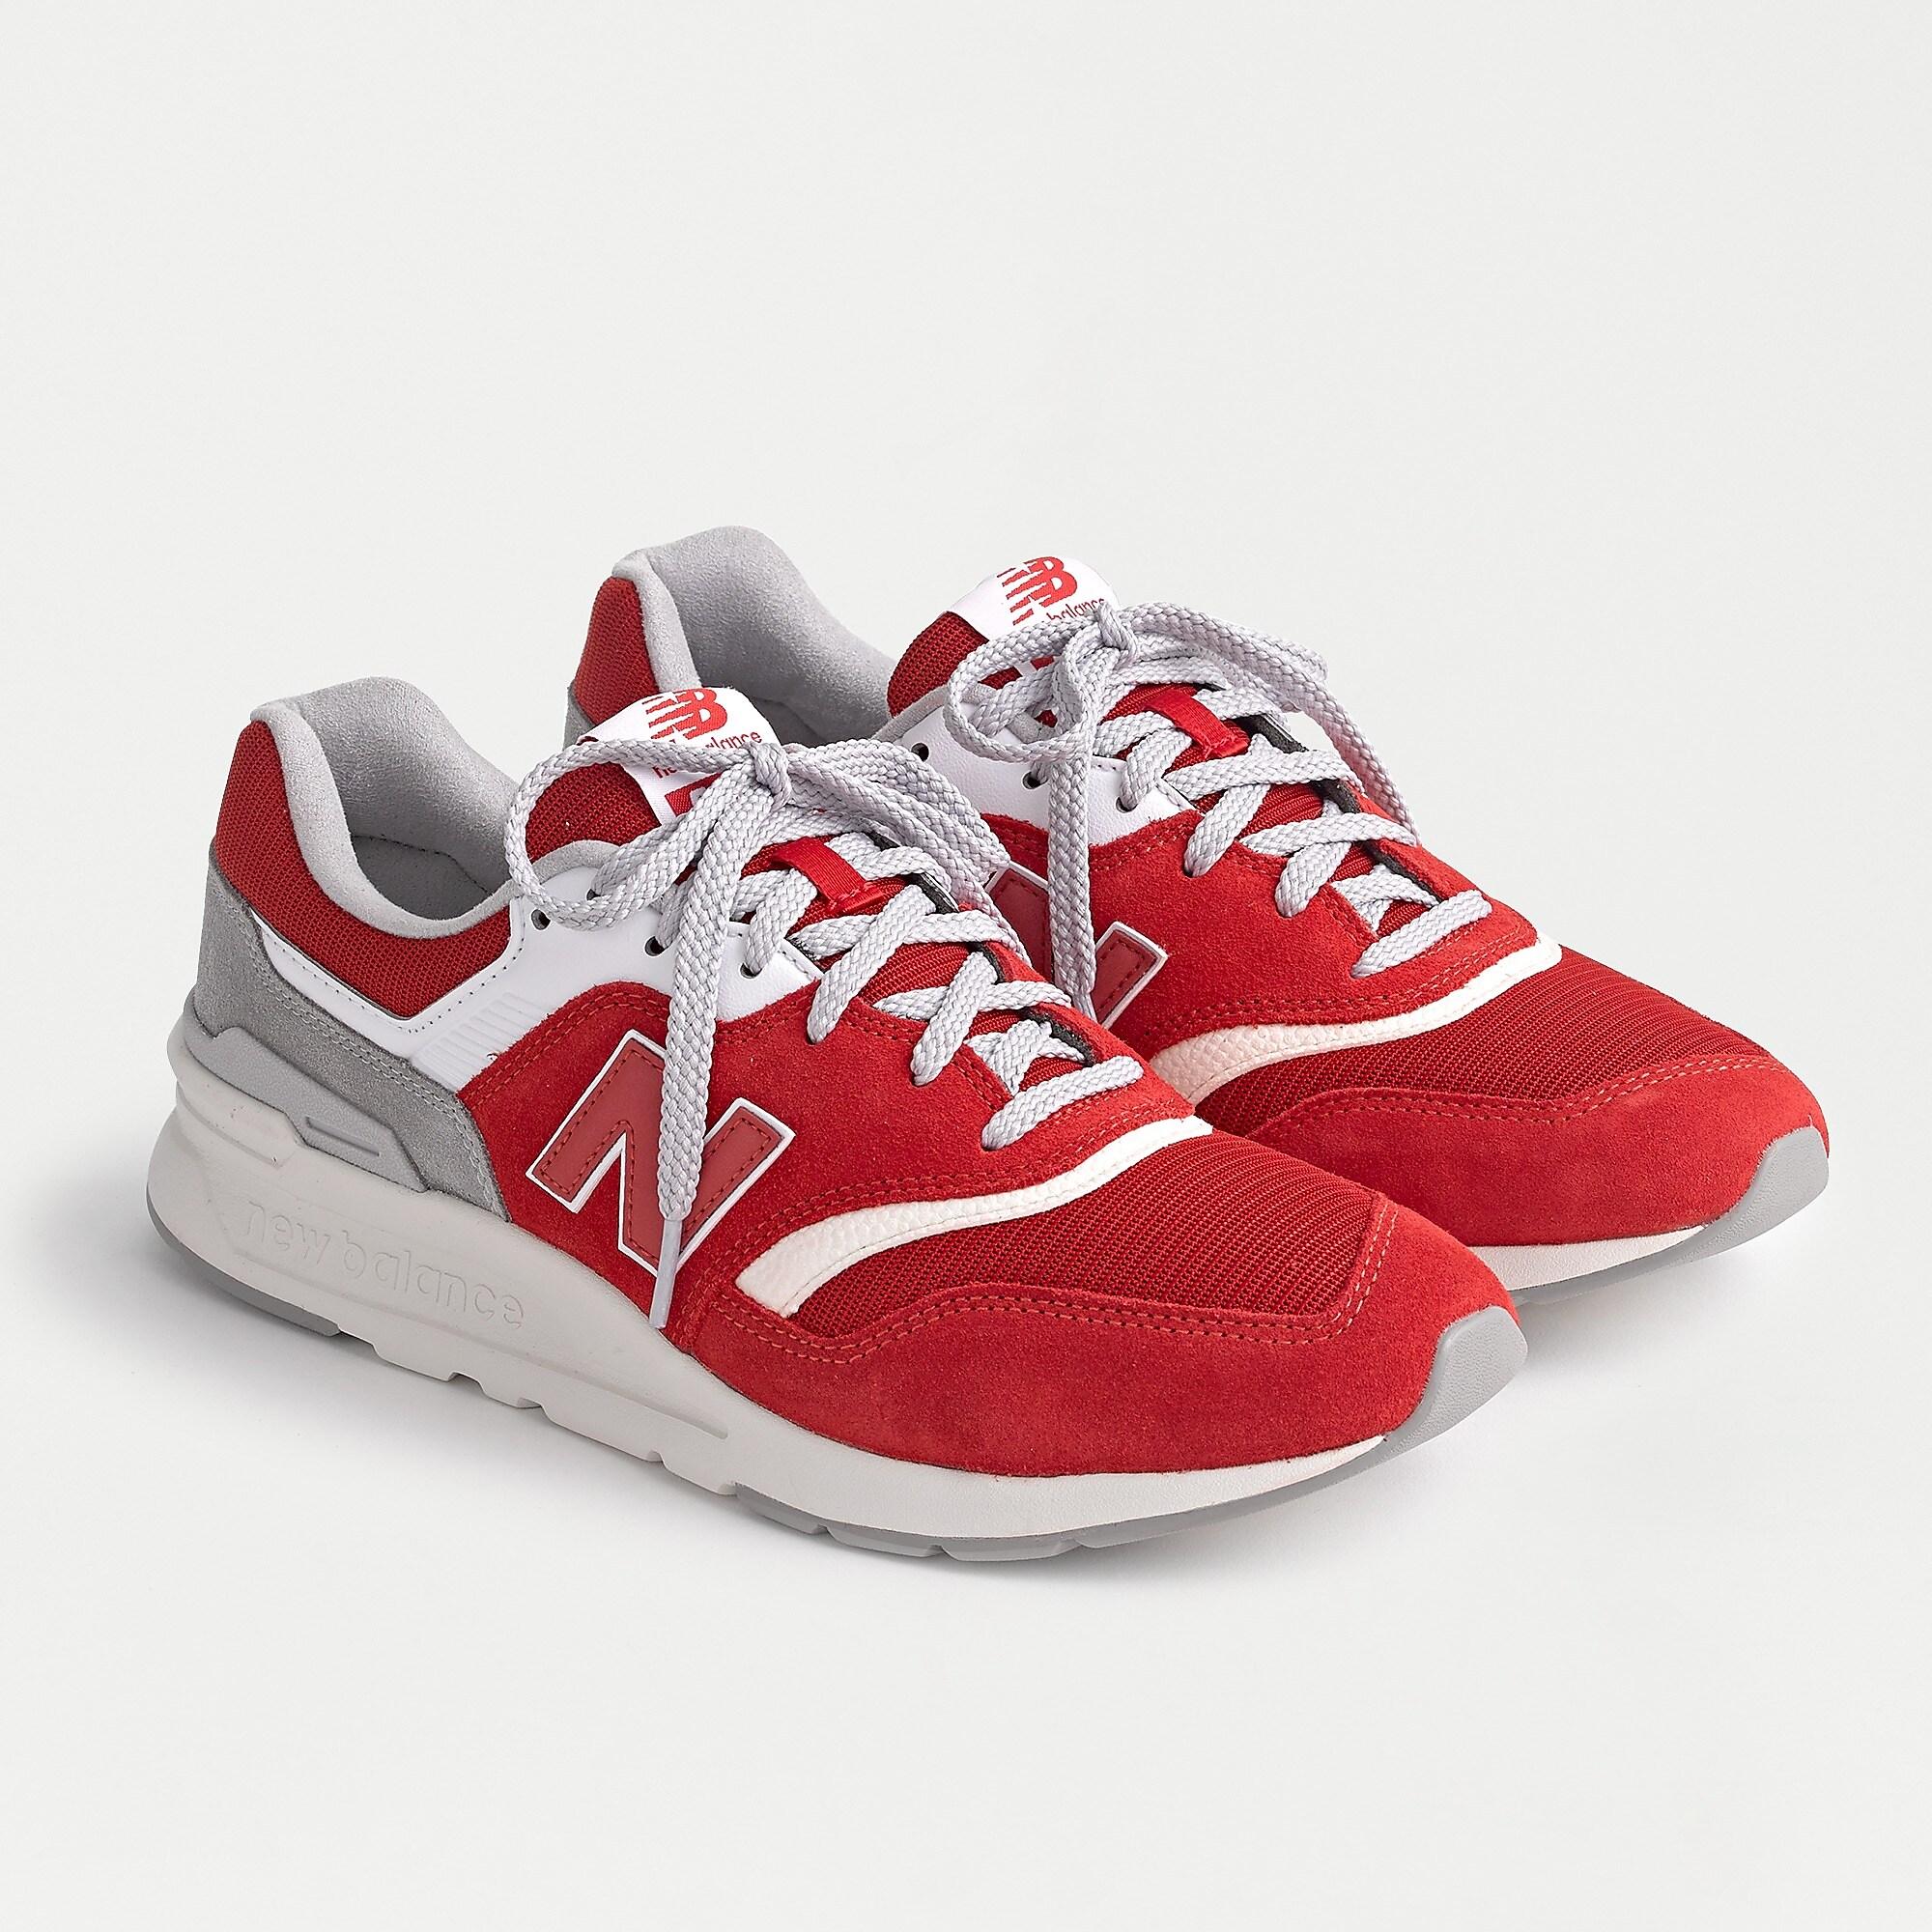 New Balance Suede 997h Sneakers in Red for Men - Lyst